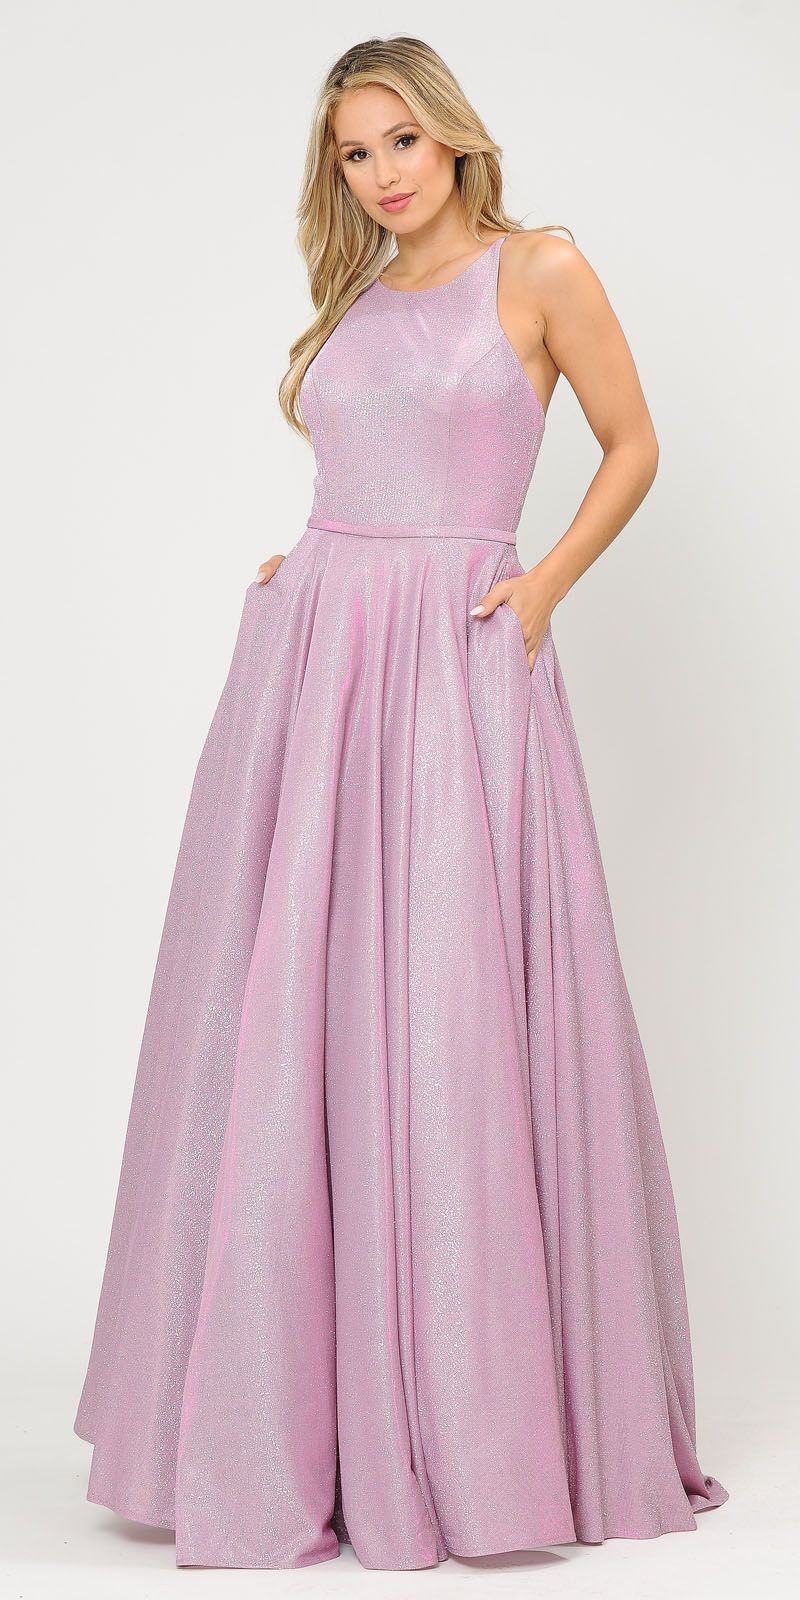 Pink/Lilac Long Prom Dress with Criss-Cross Back and Pockets